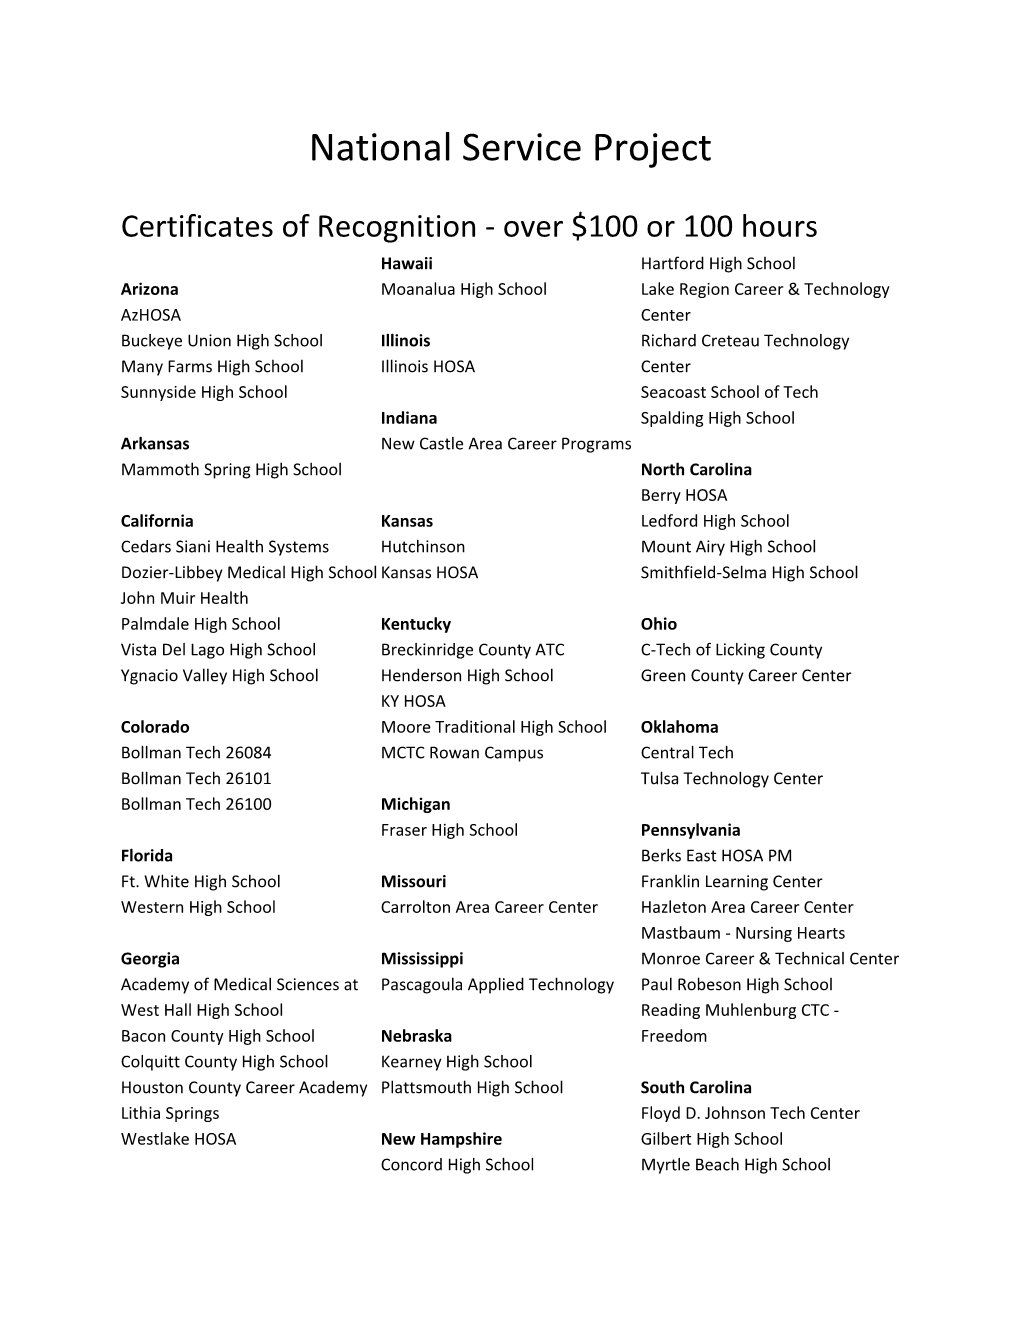 Certificates of Recognition - Over $100 Or 100 Hours